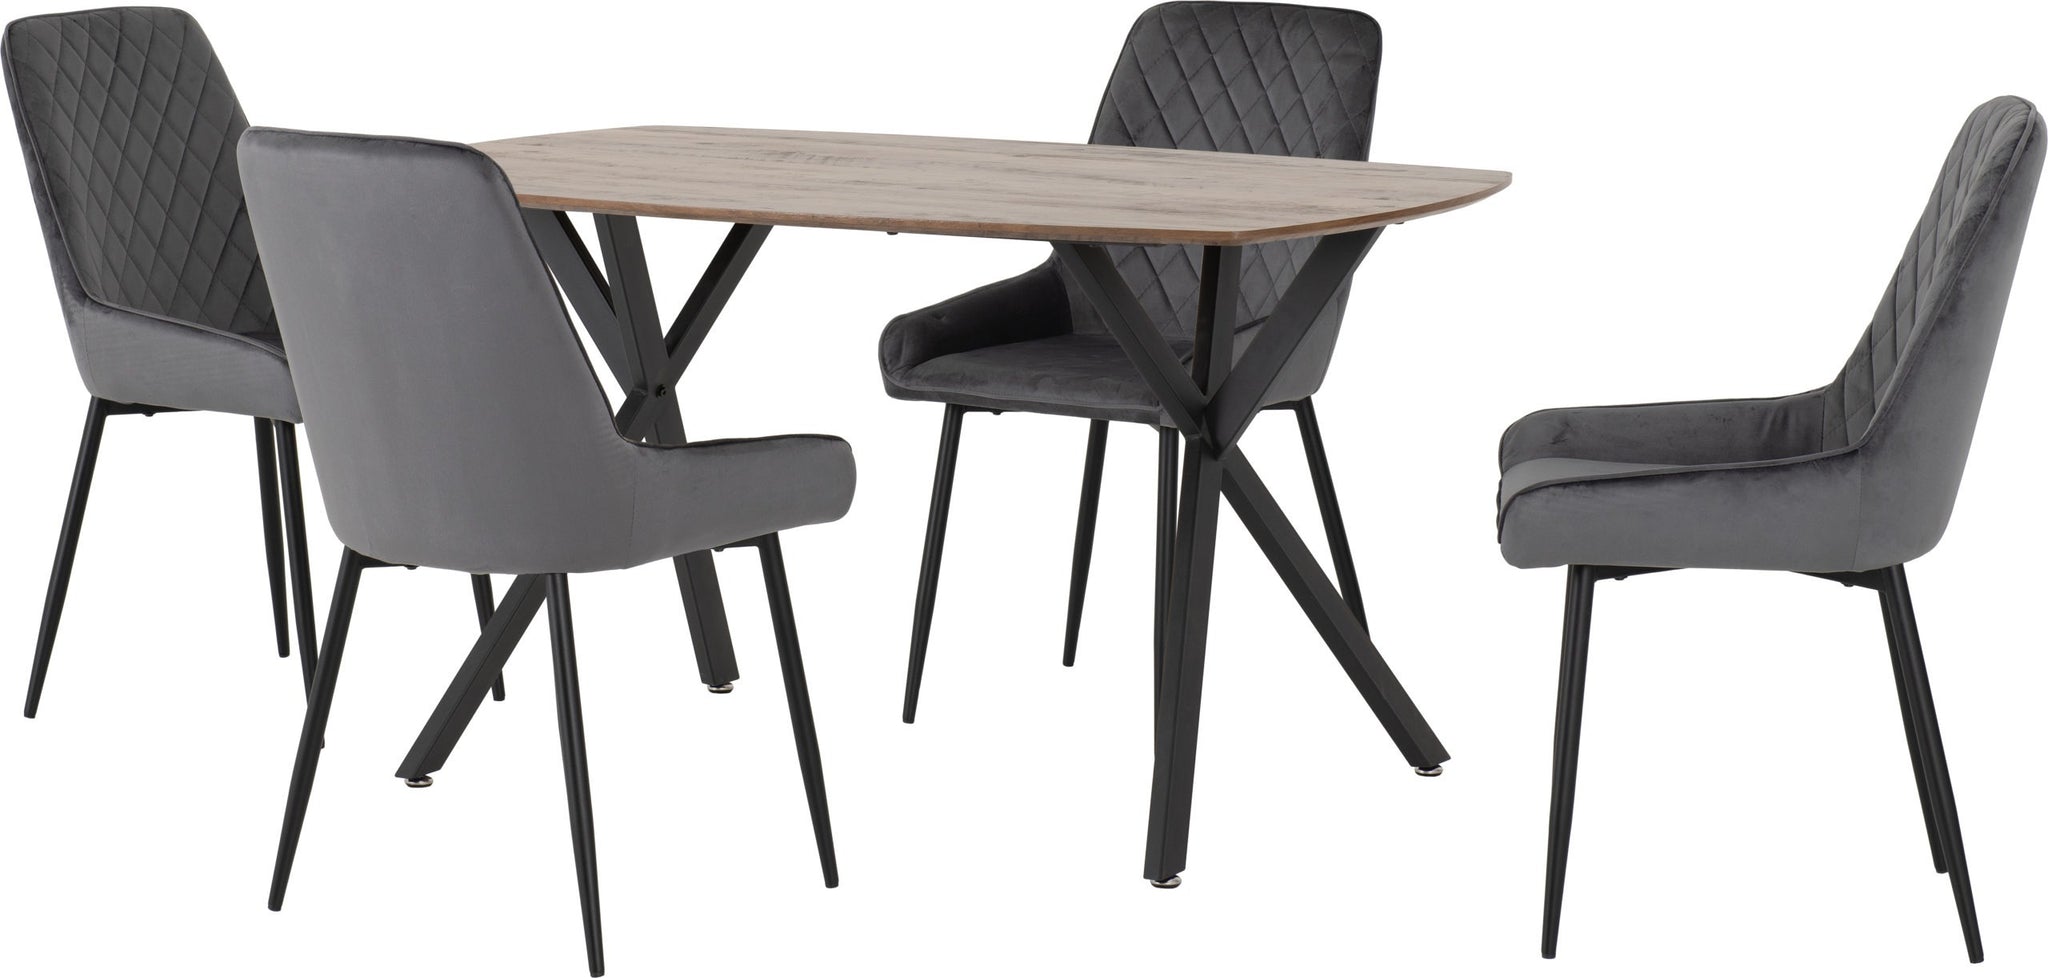 Athens Rectangular Dining Set with Avery Chairs - Medium Oak Effect/Black/Grey Velvet- The Right Buy Store